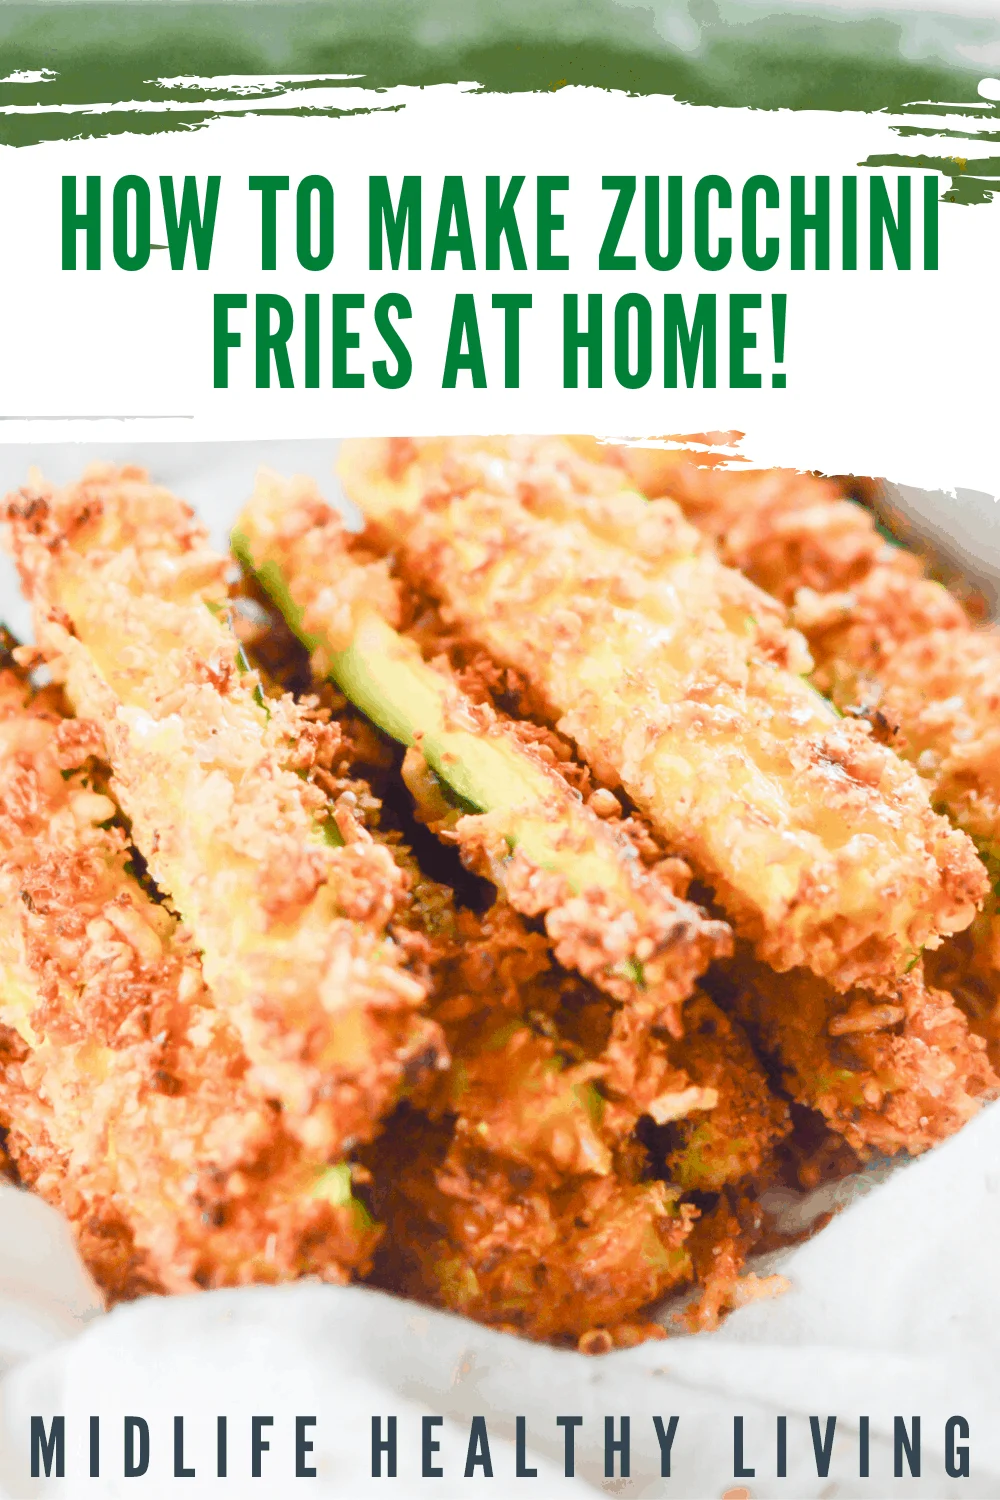 A pin showing the title of how to make zucchini fries at home on top of a view of the finished fries ready to be eaten.